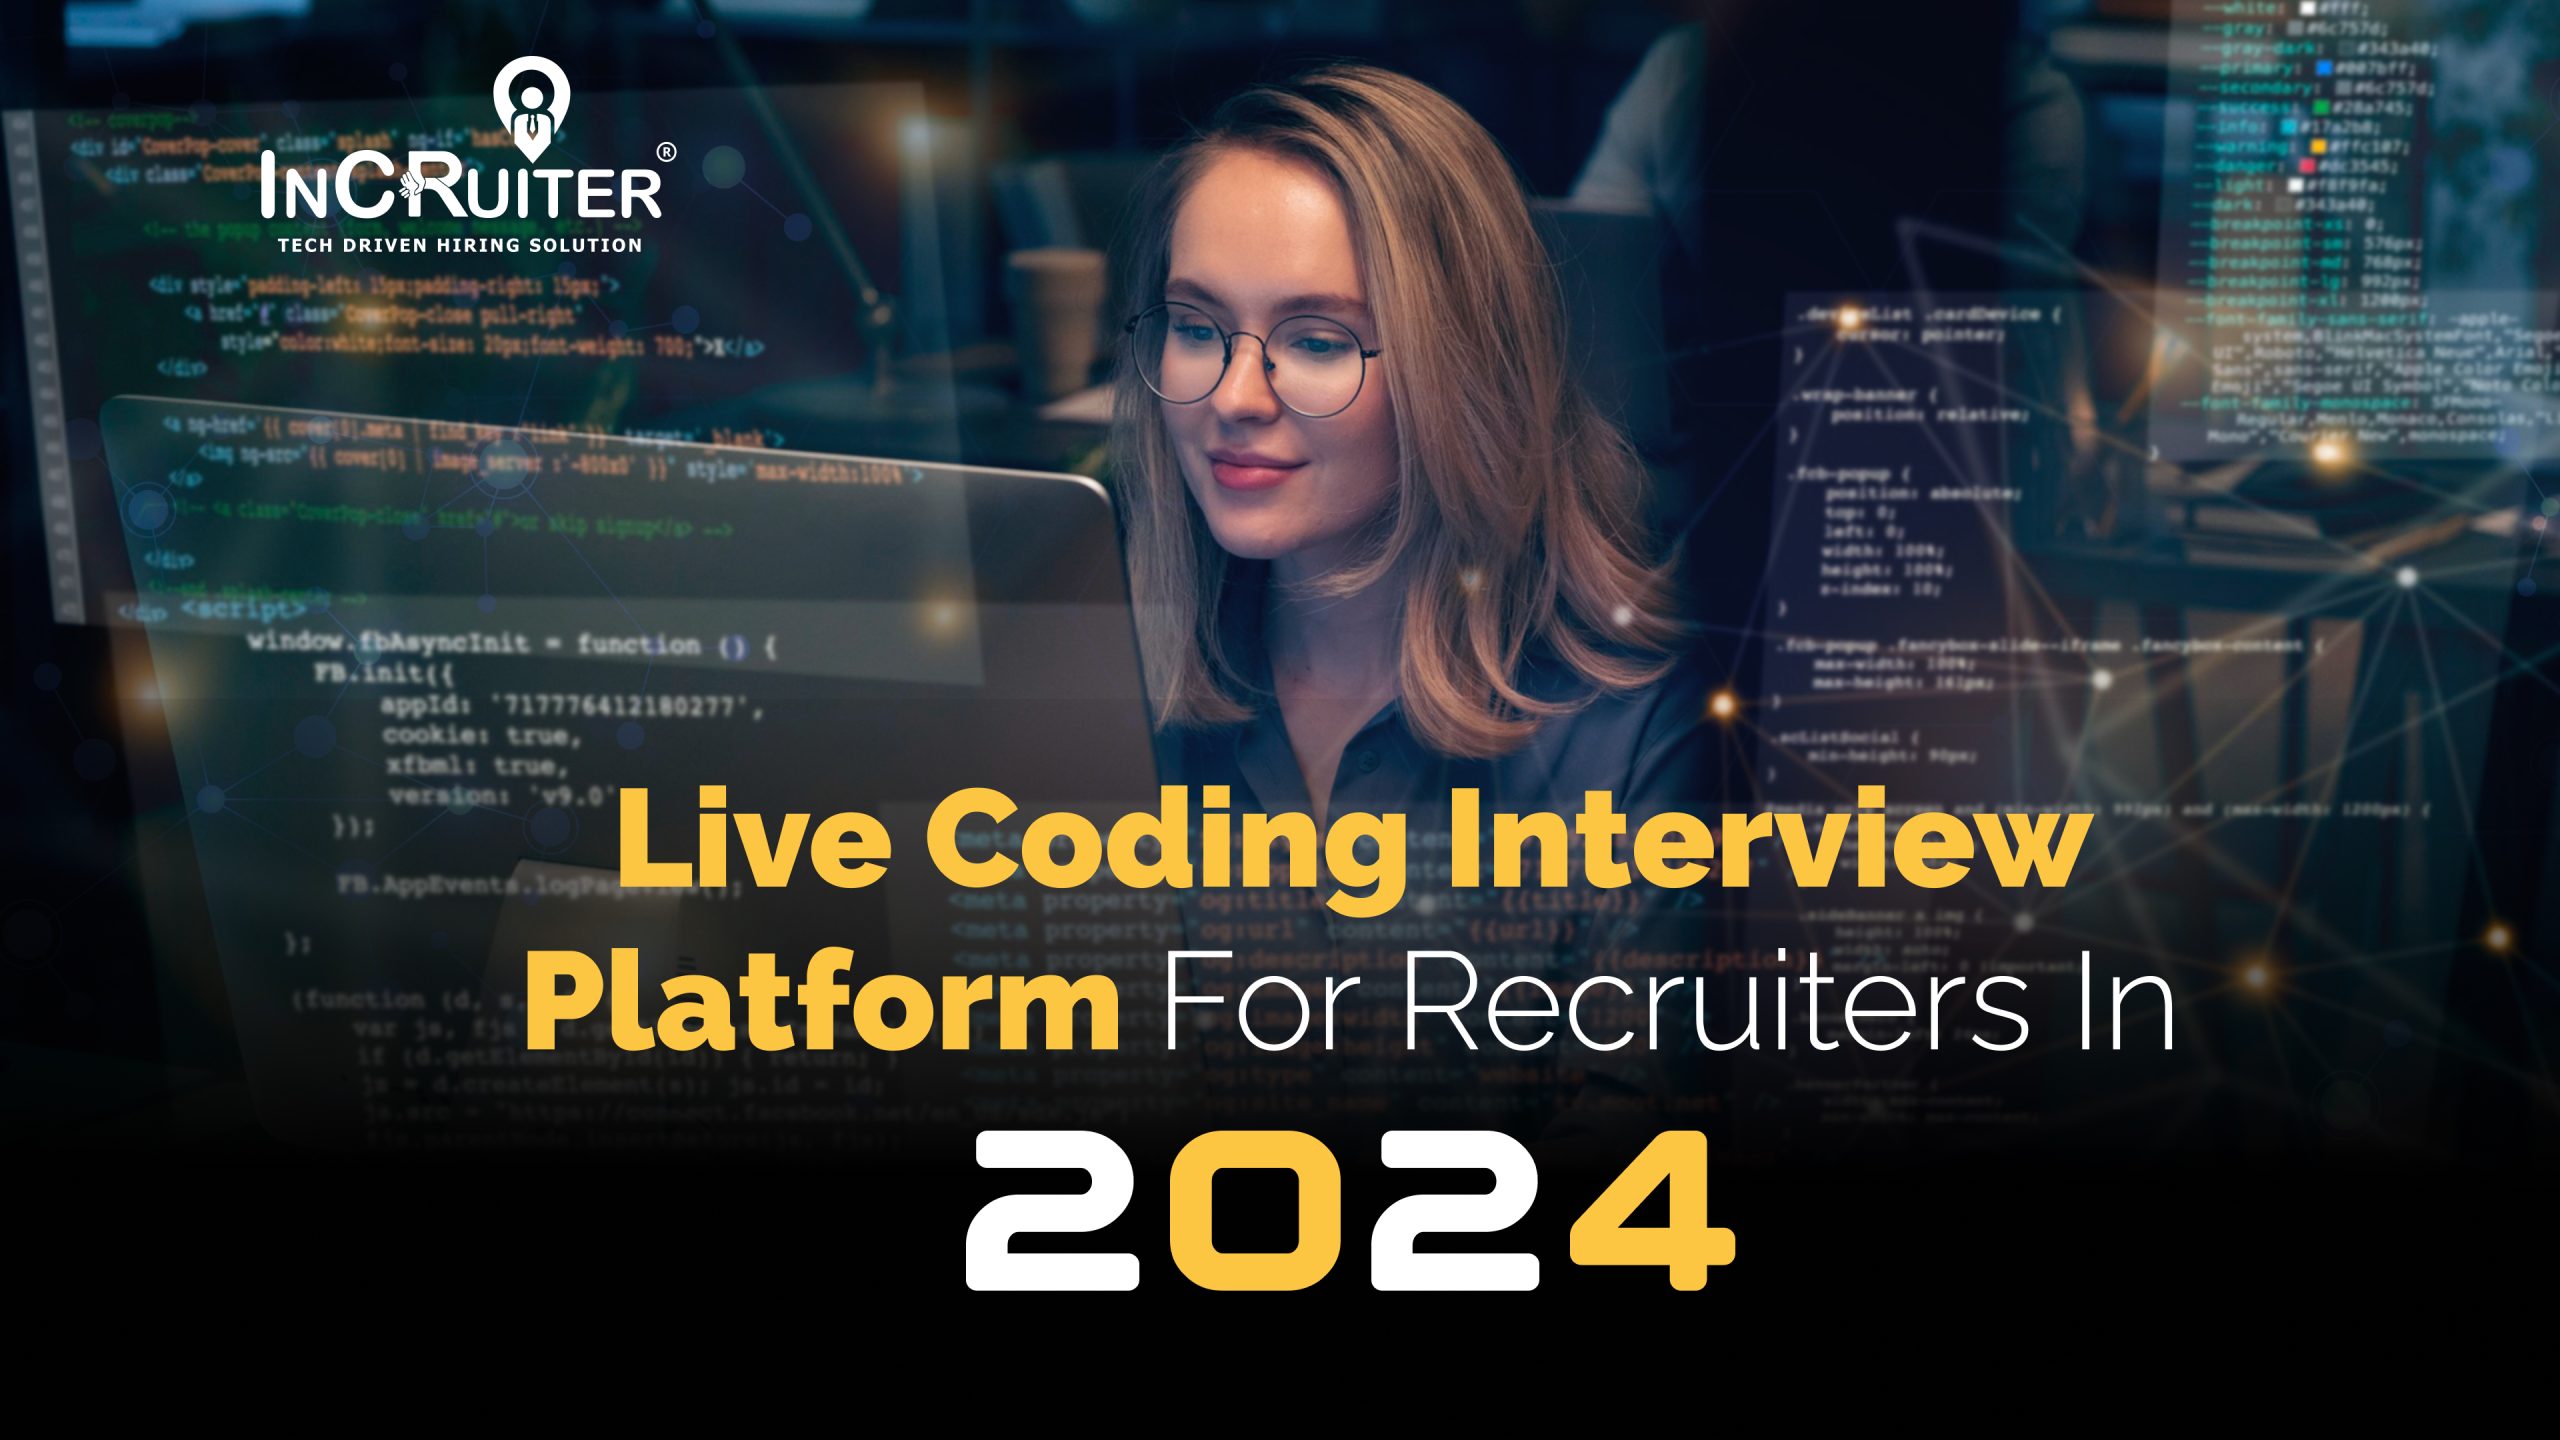 Live coding interview platform for recruiters in (3)